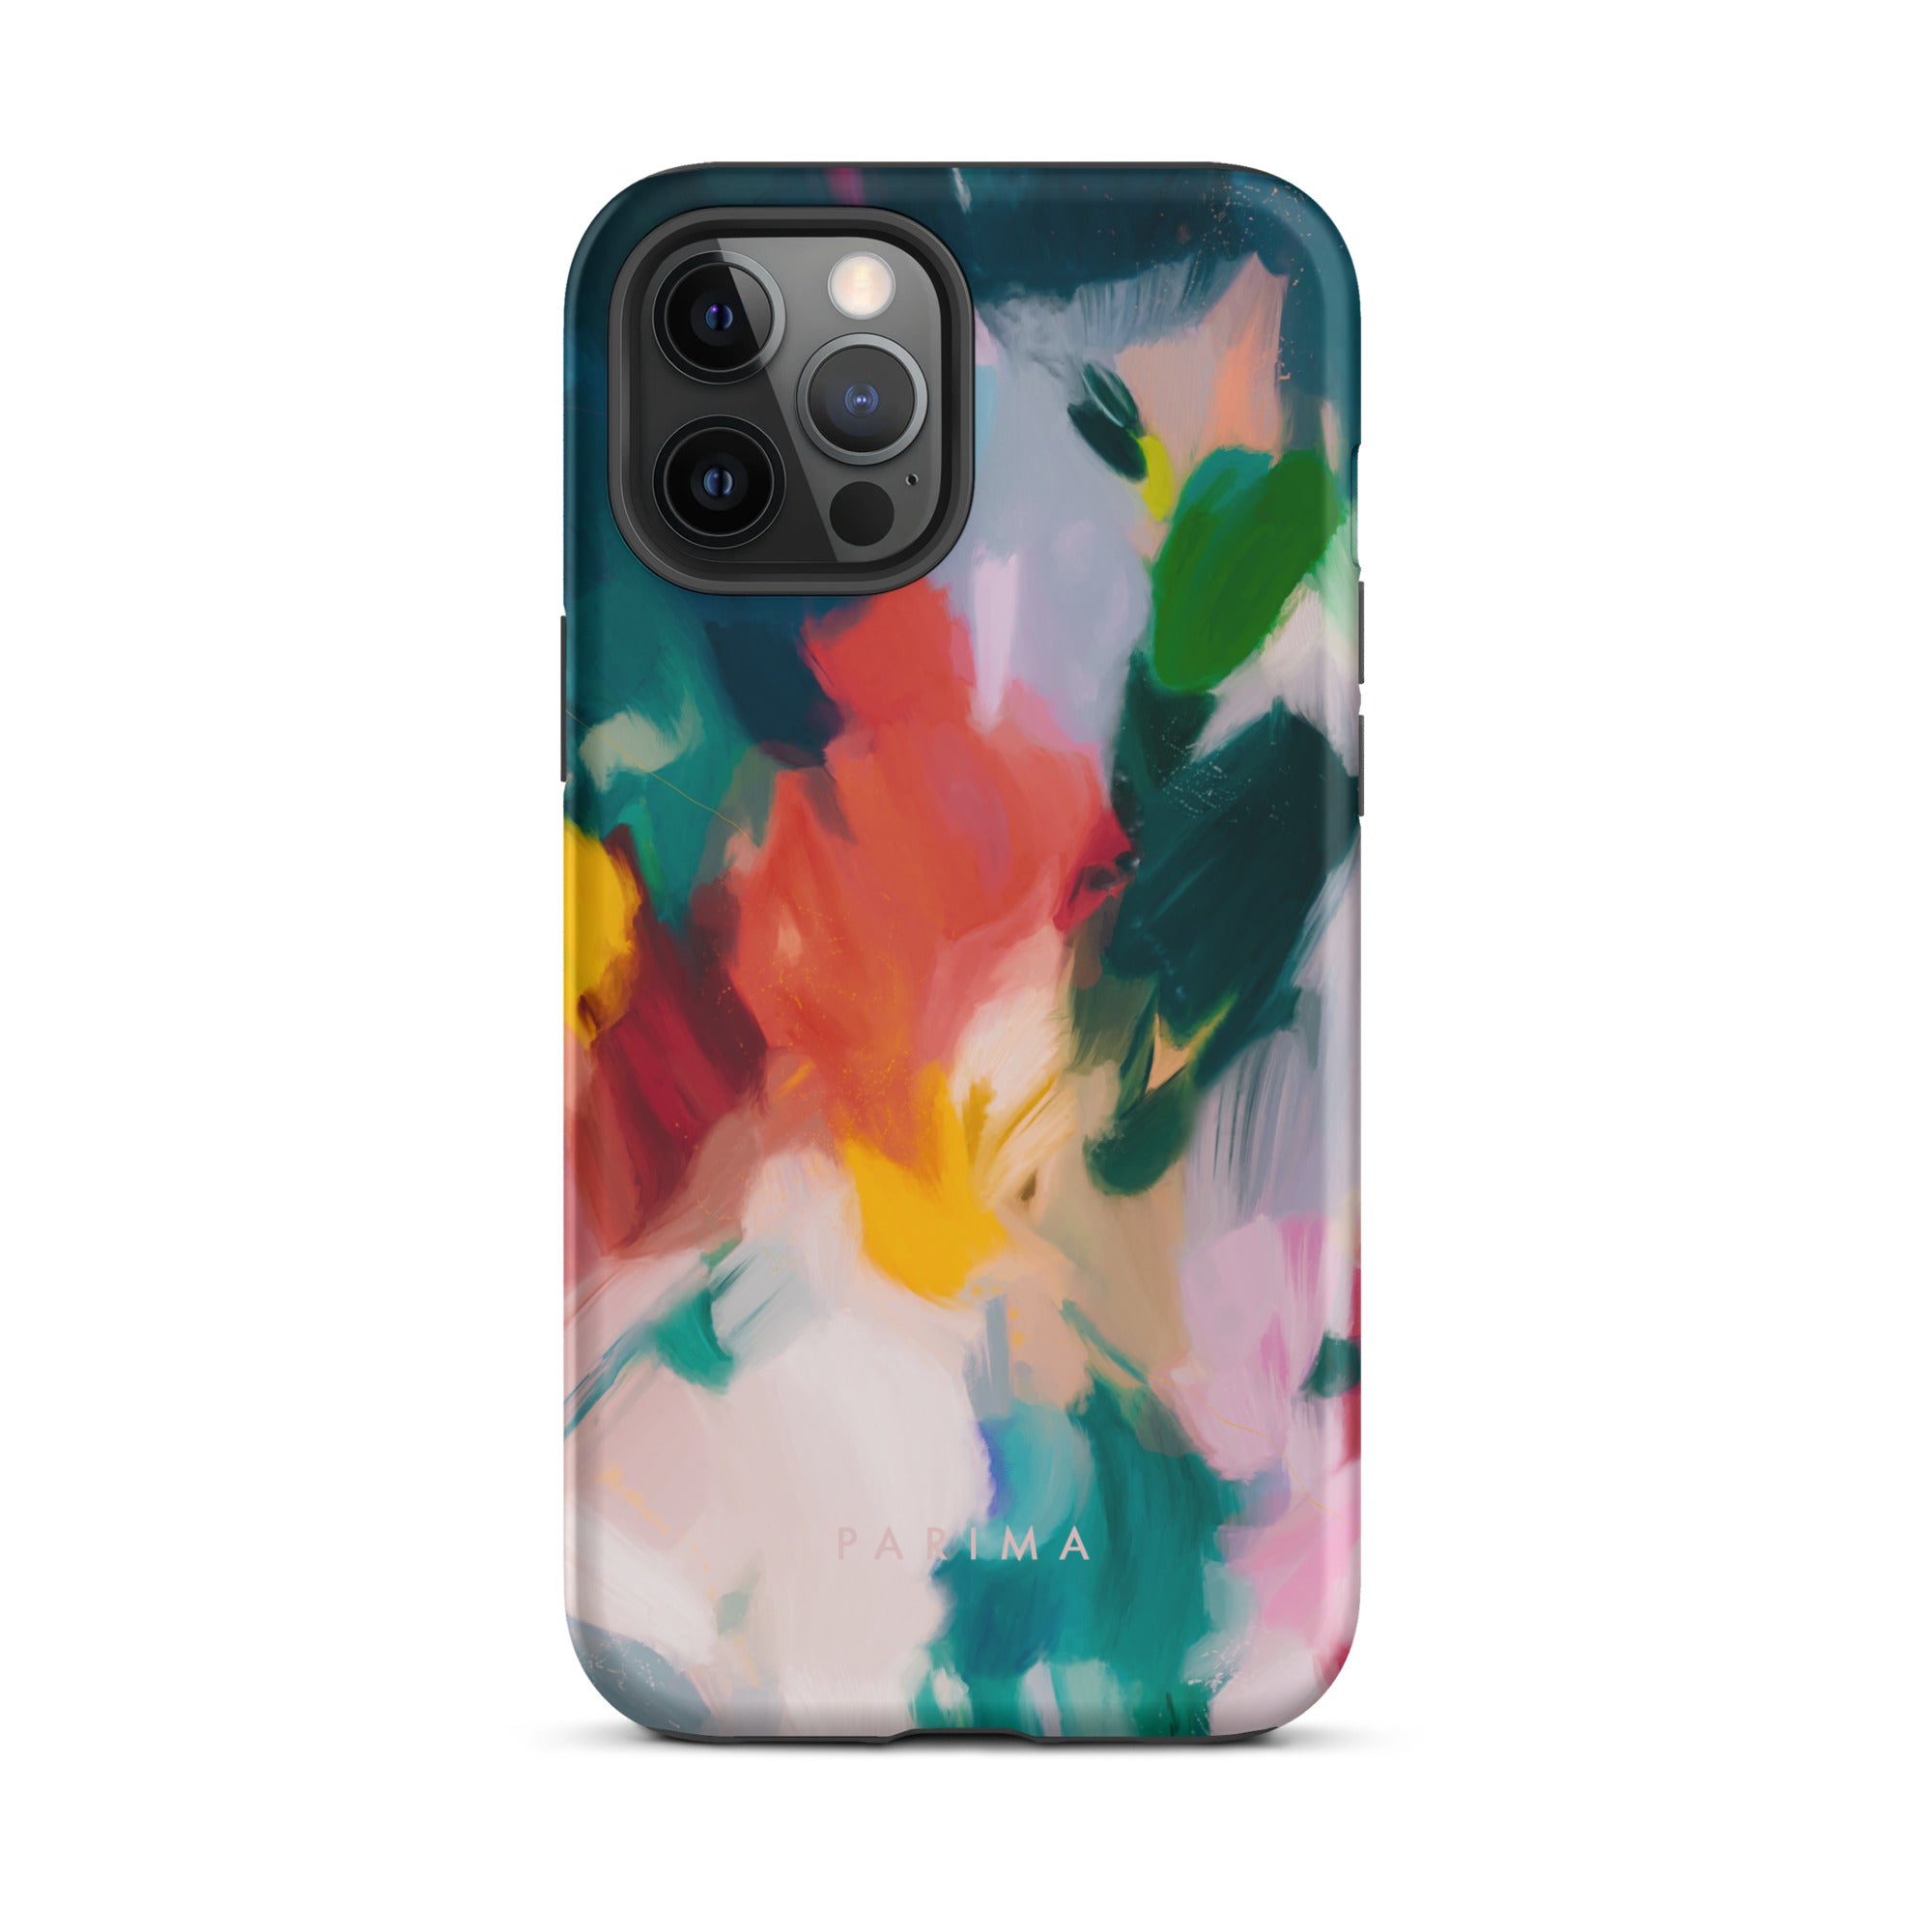 Pomme, blue and red abstract art on iPhone 12 Pro Max tough case by Parima Studio